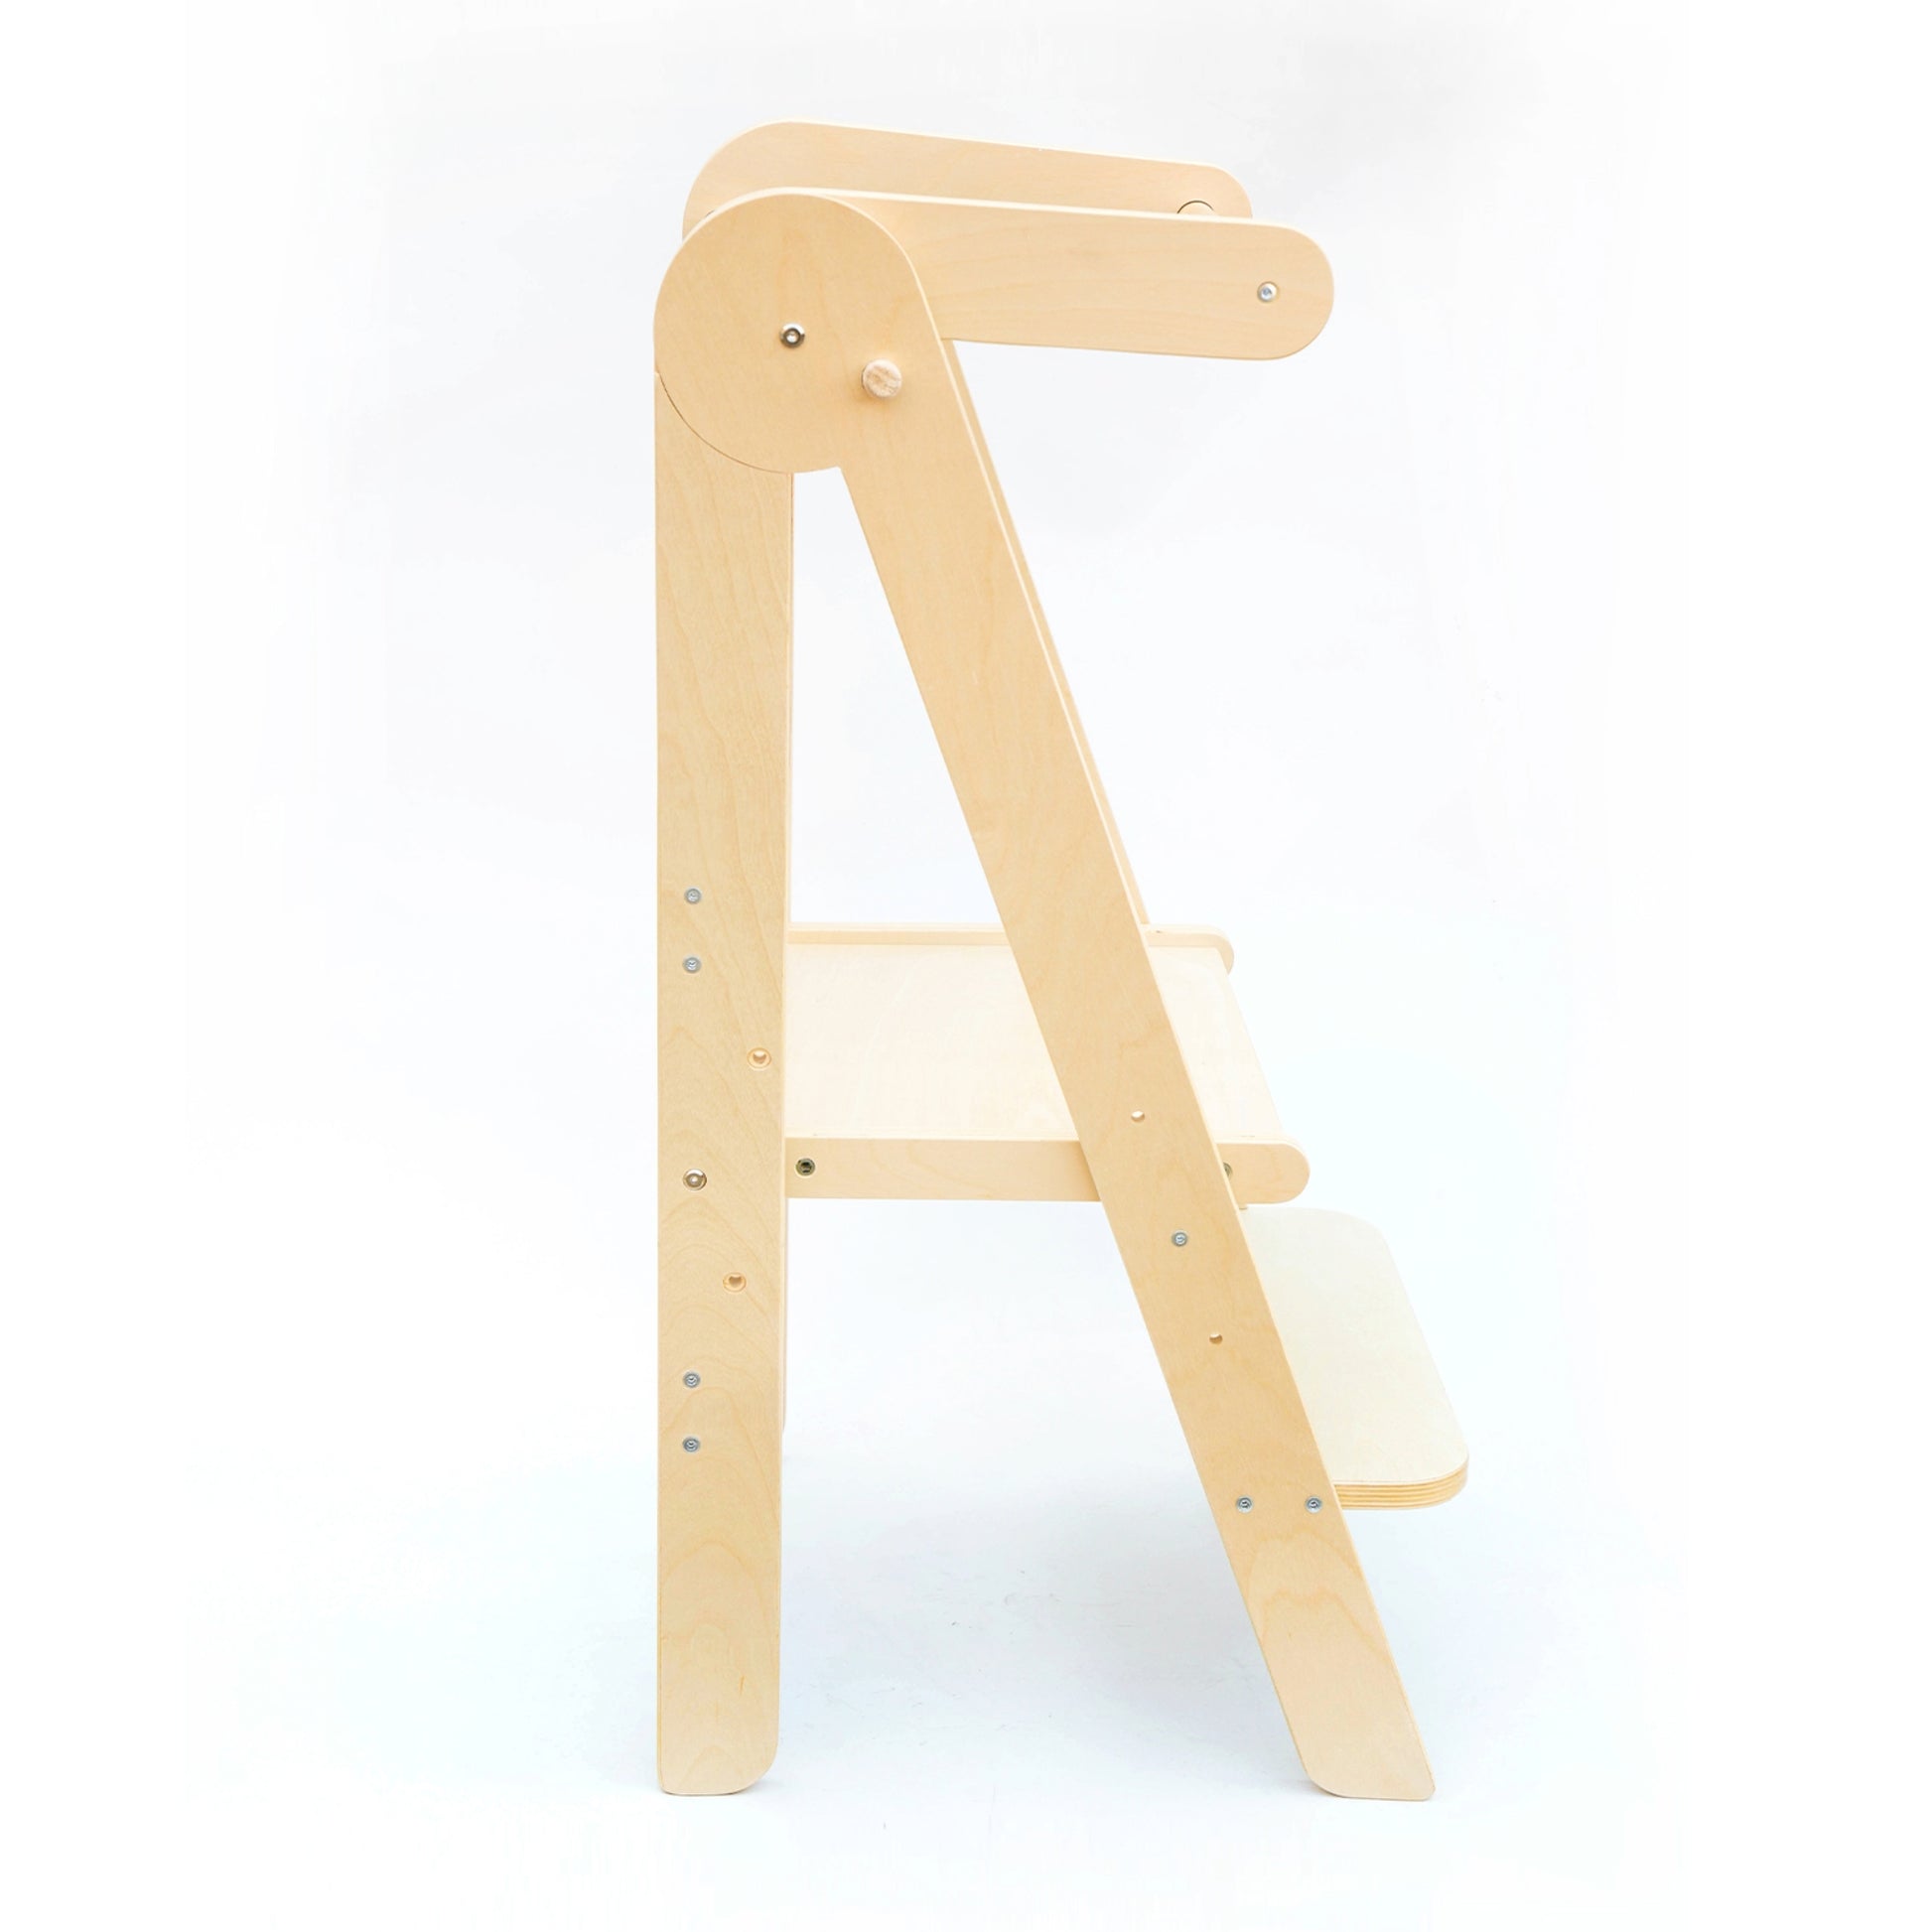 Side view of the Natural Adjustable Foldable Learning Tower illustrating the sleek design and stability on a white background.